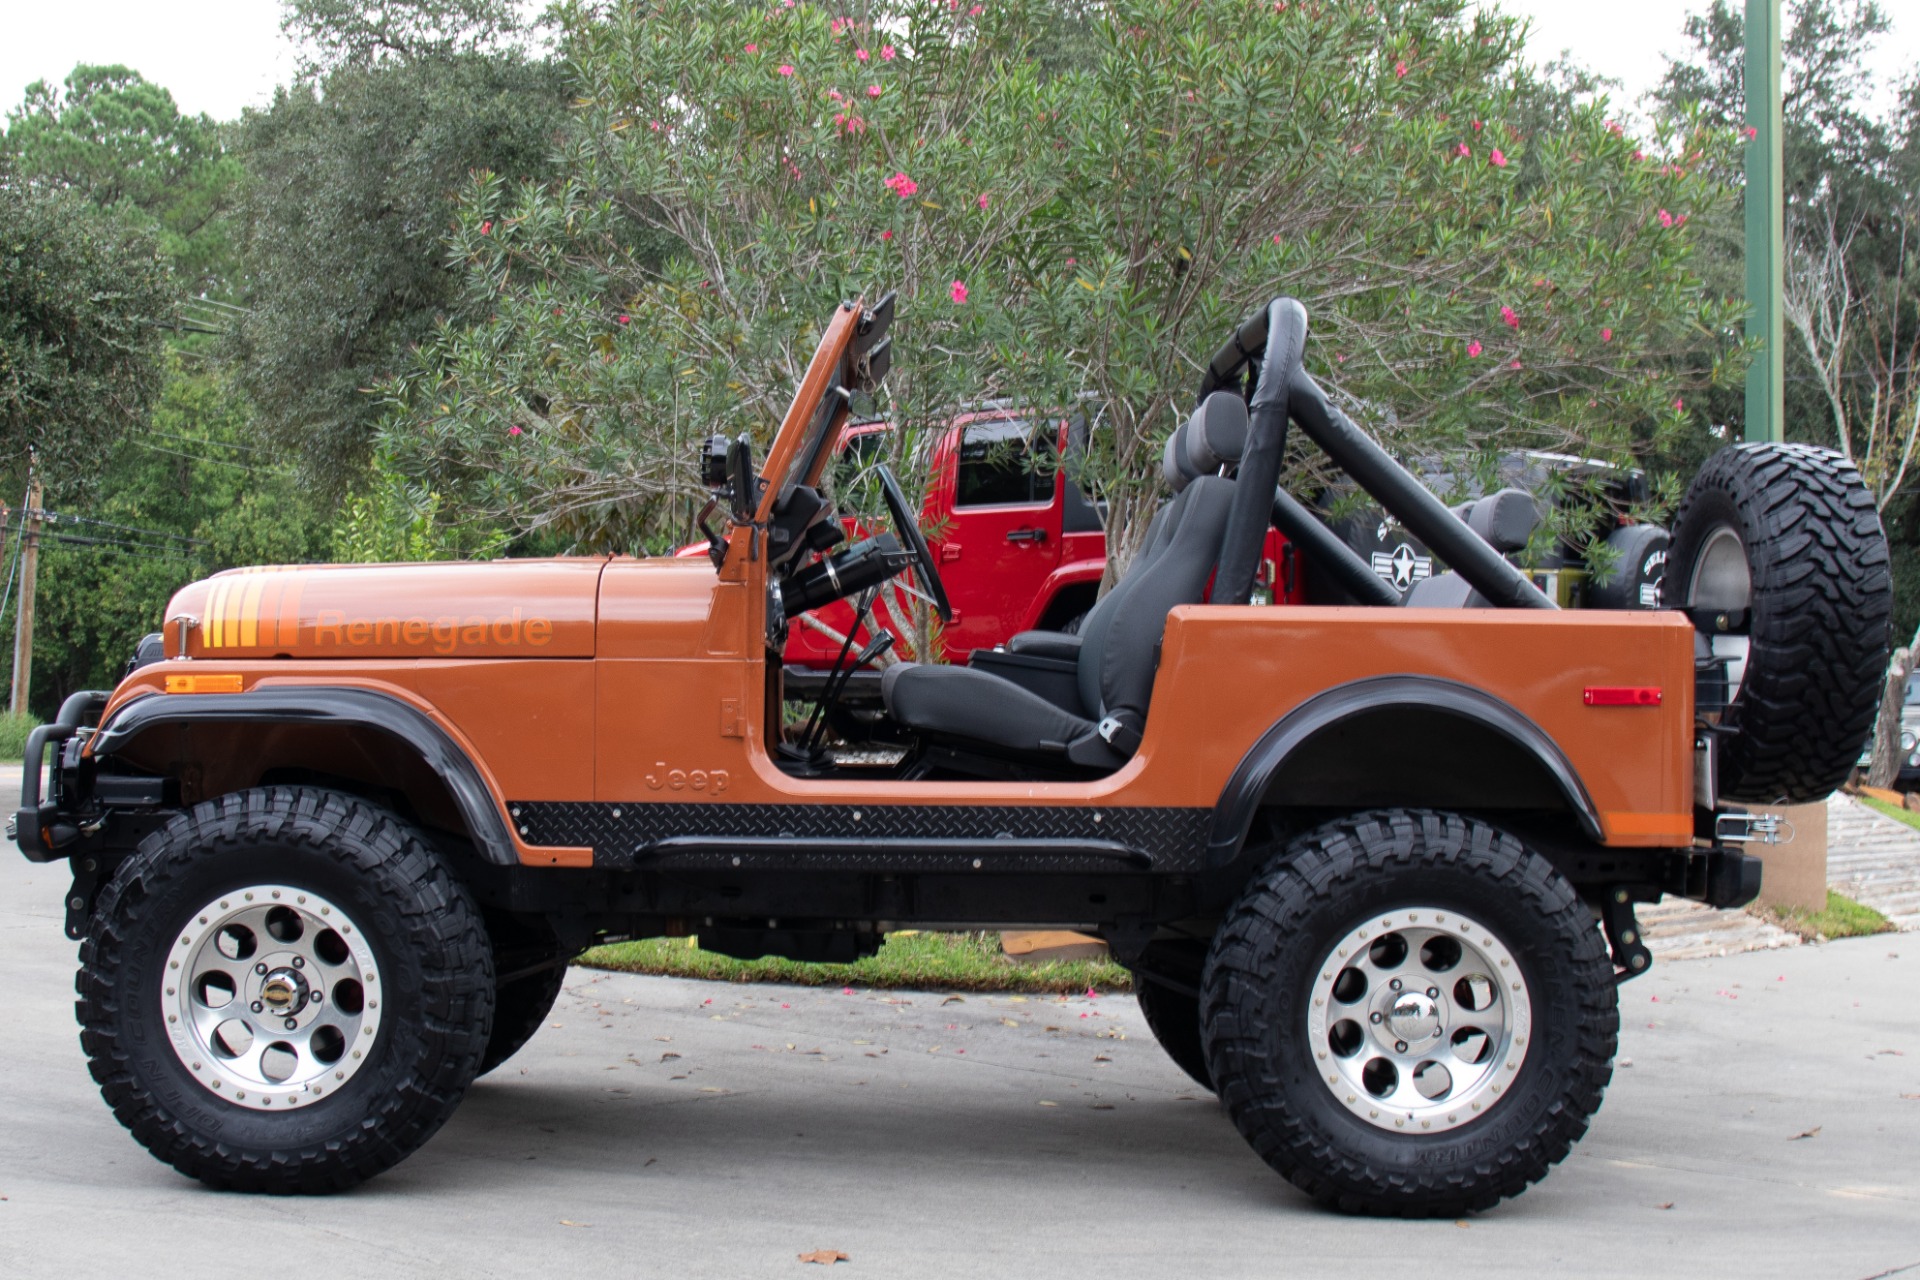 Used 1980 Jeep Cj 7 For Sale 25995 Select Jeeps Inc Stock 722736